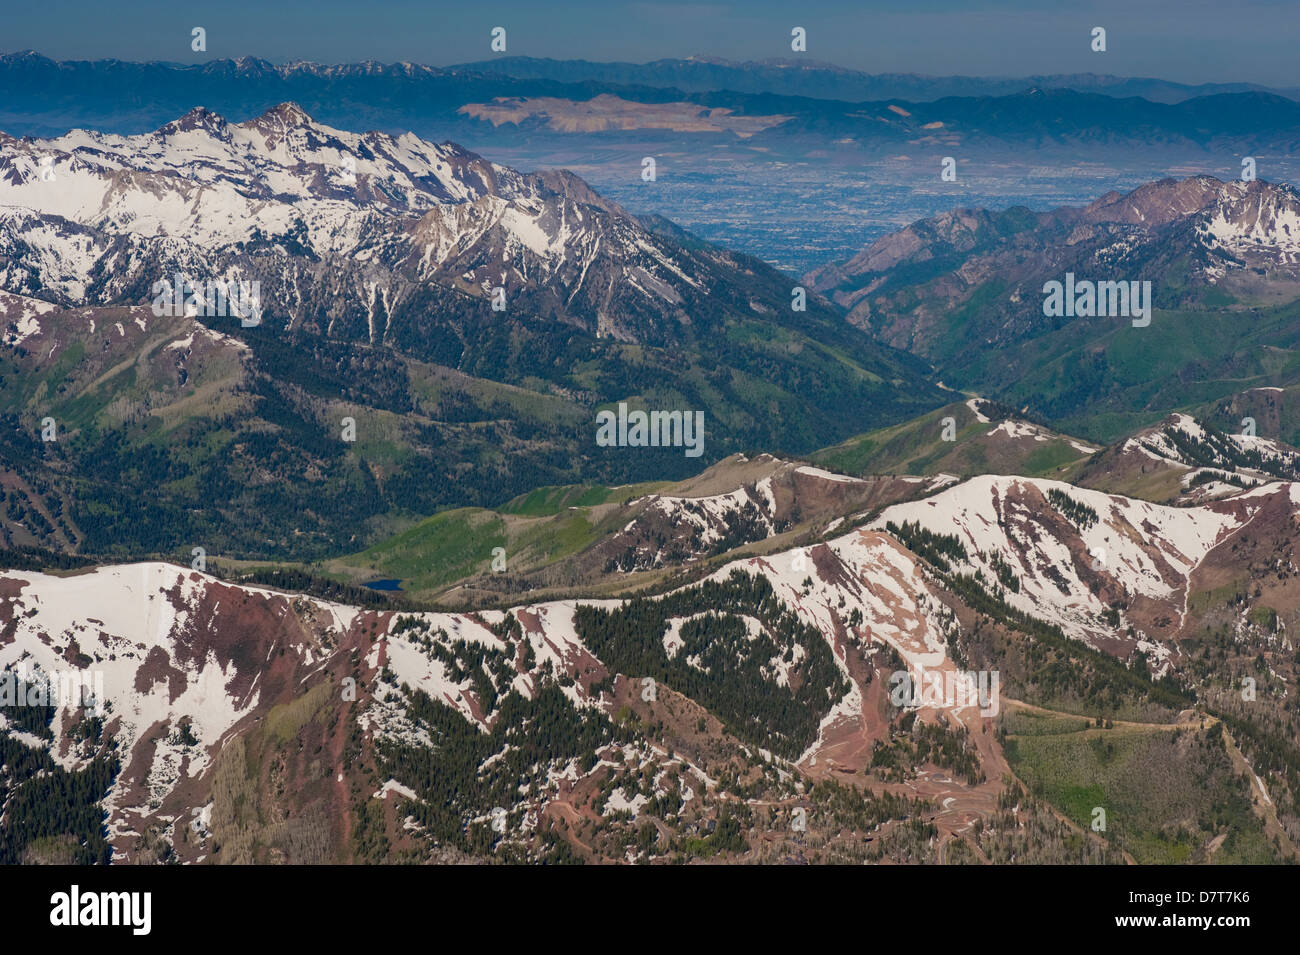 Willow Lake, Bear Trap, Mt. Raymond und Canyons Ski Area, Mt. Olympus Wildnis, Wasatch-Cache National Forest Stockfoto